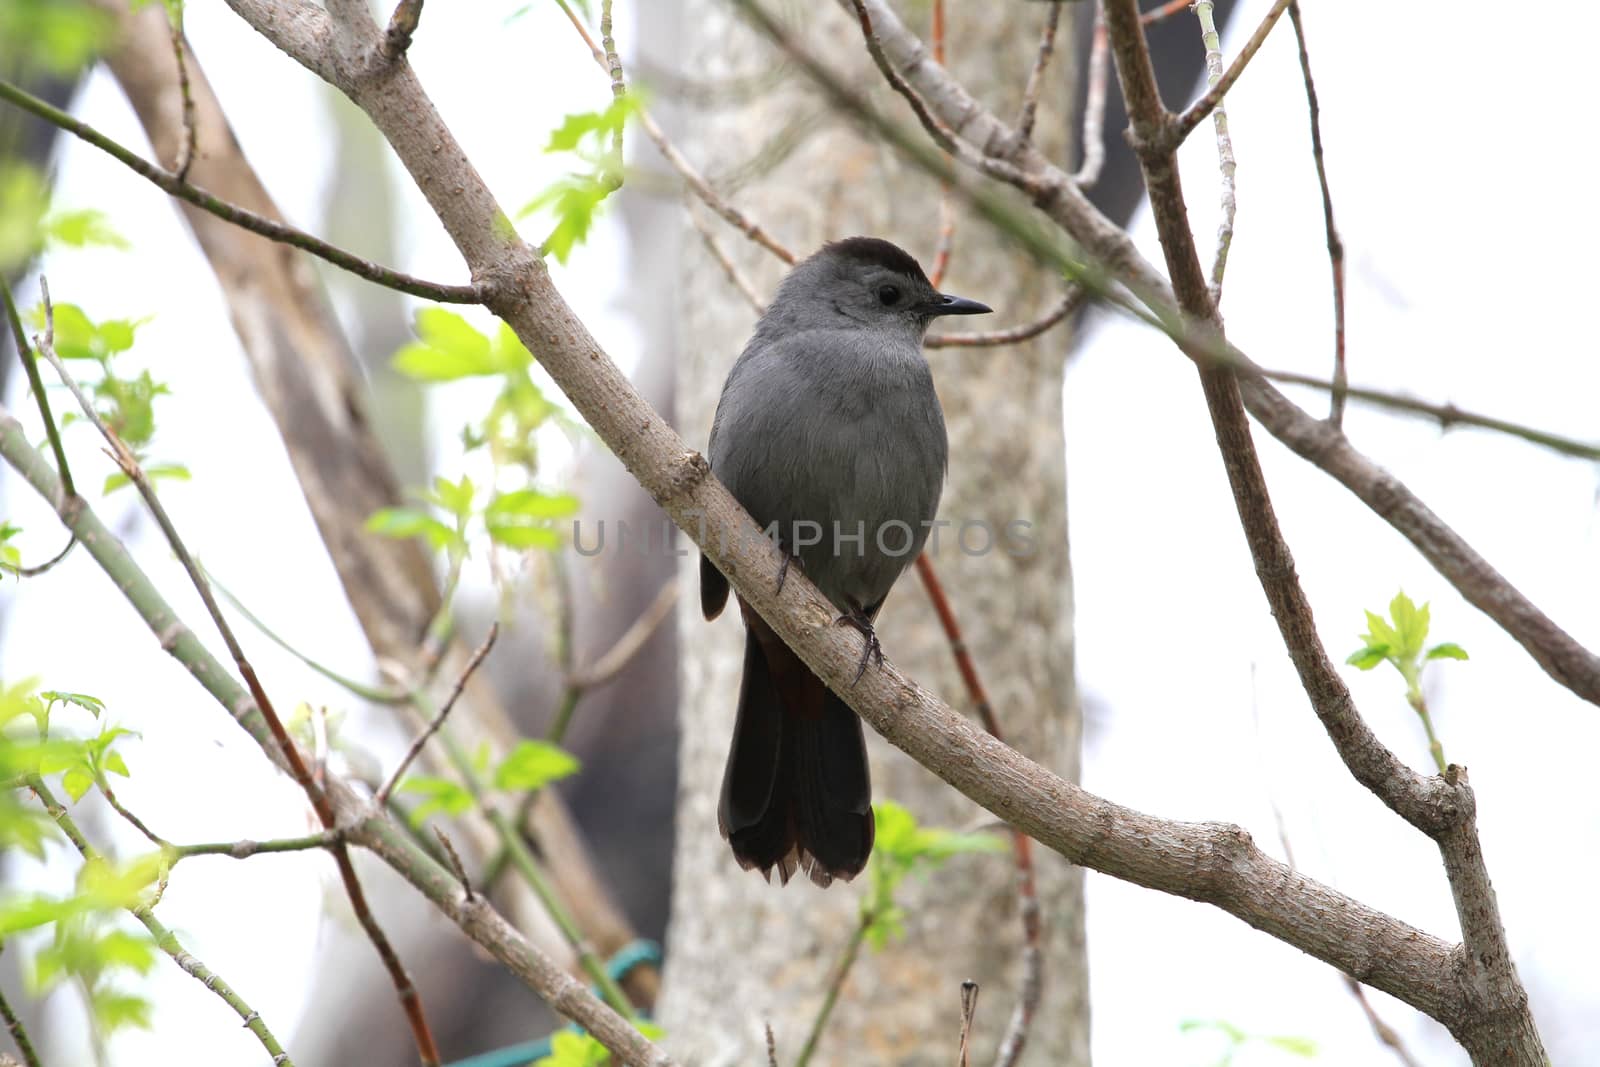 Gray Catbird perched on branch early spring